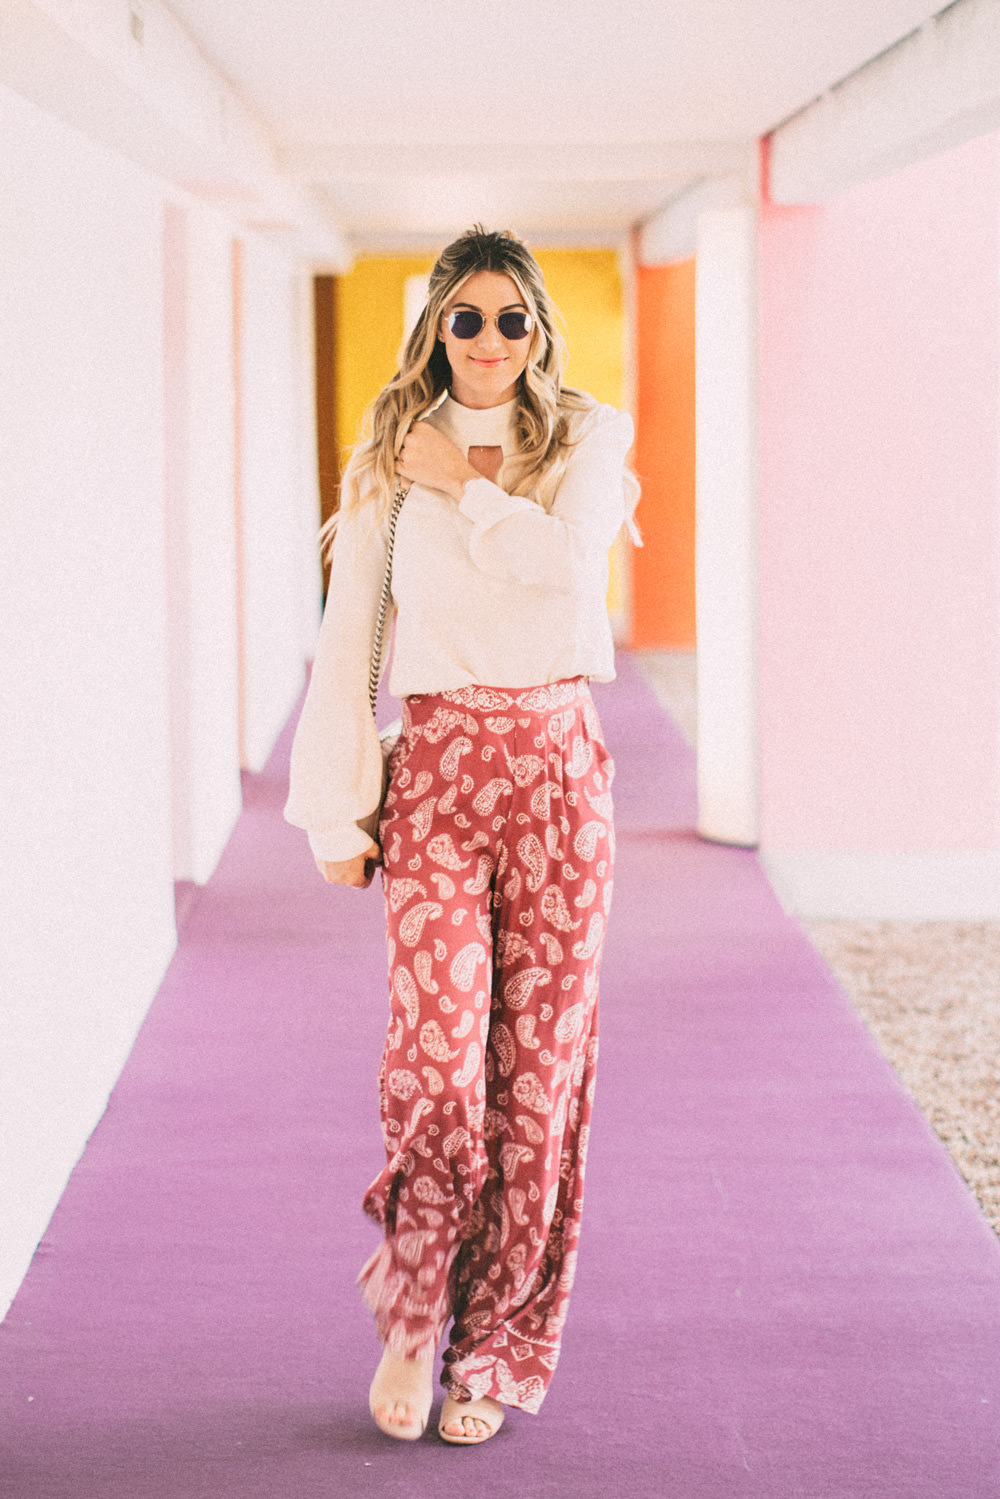 Caitlin Lindquist of the Arizona fashion blog Dash of Darling shares how to style pink high waisted paisley pants for spring